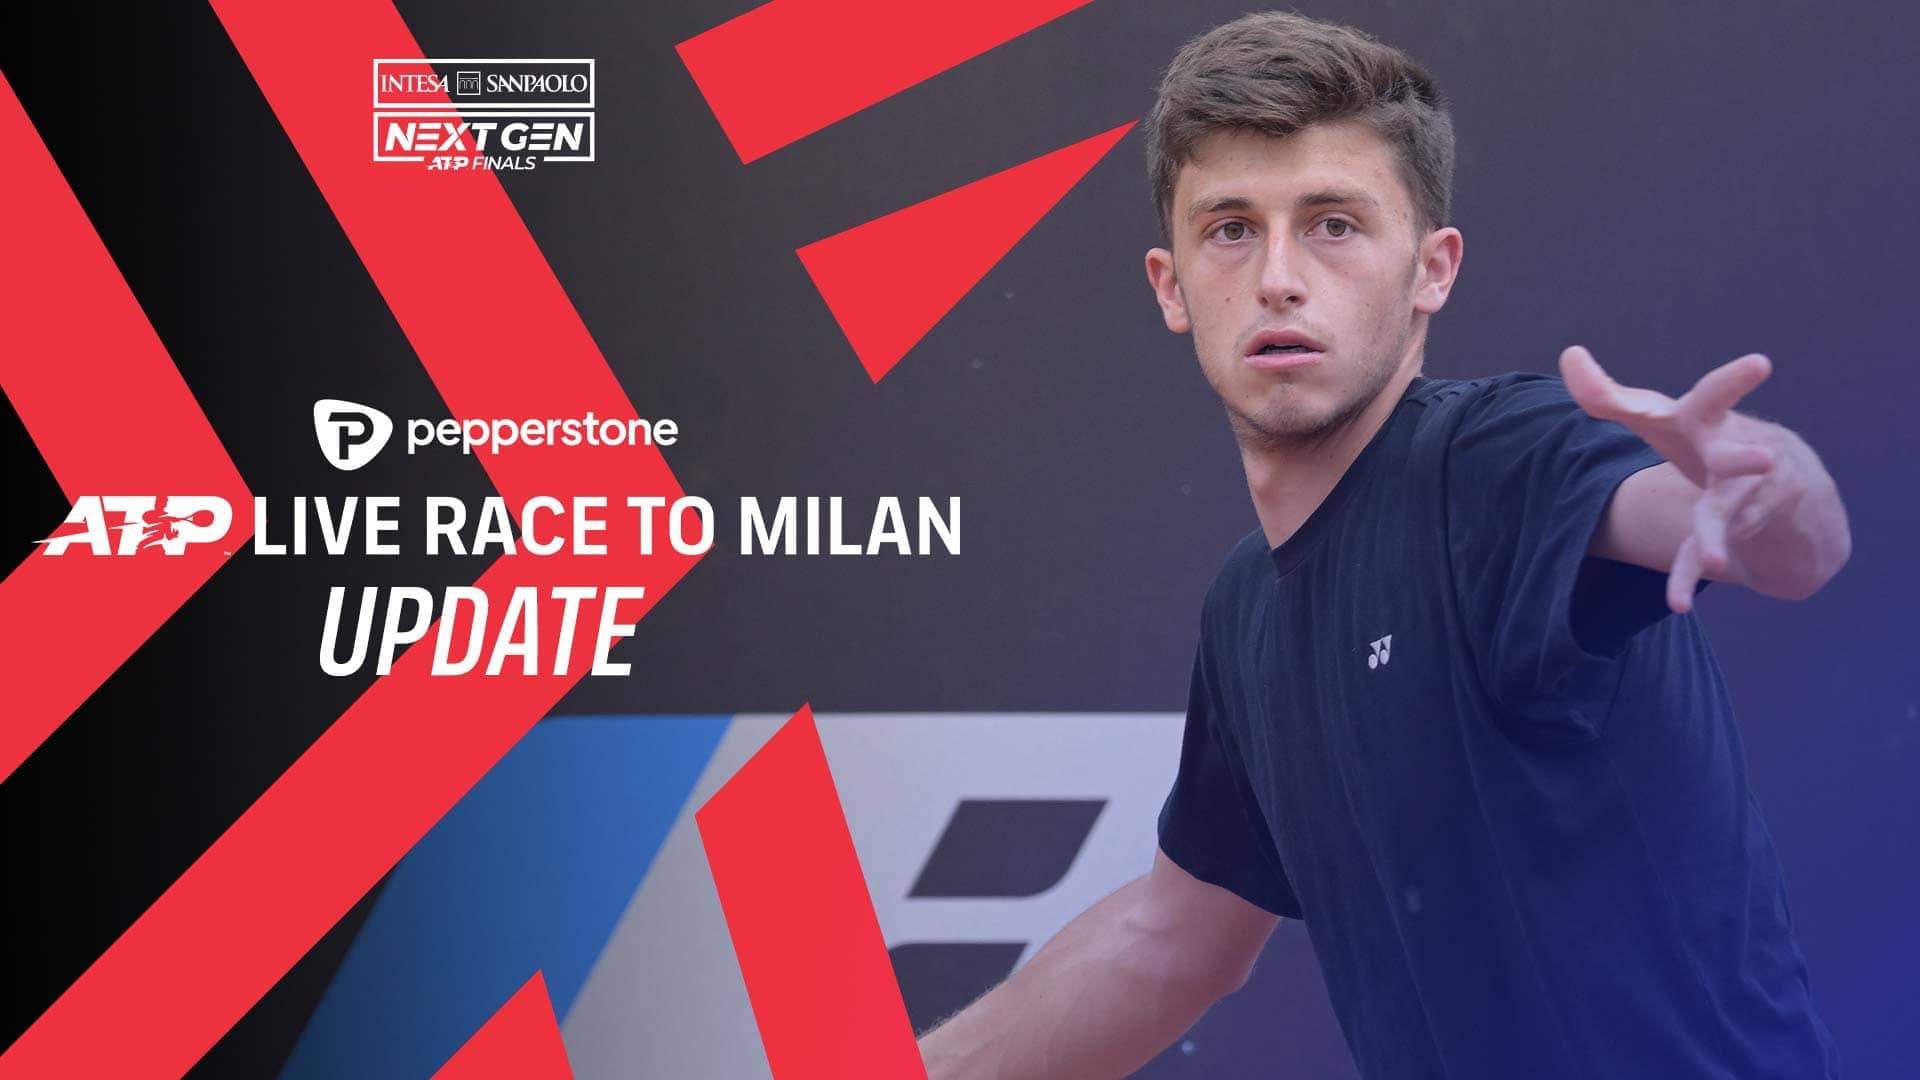 Luca Nardi is 11th in the Pepperstone ATP Live Race To Milan